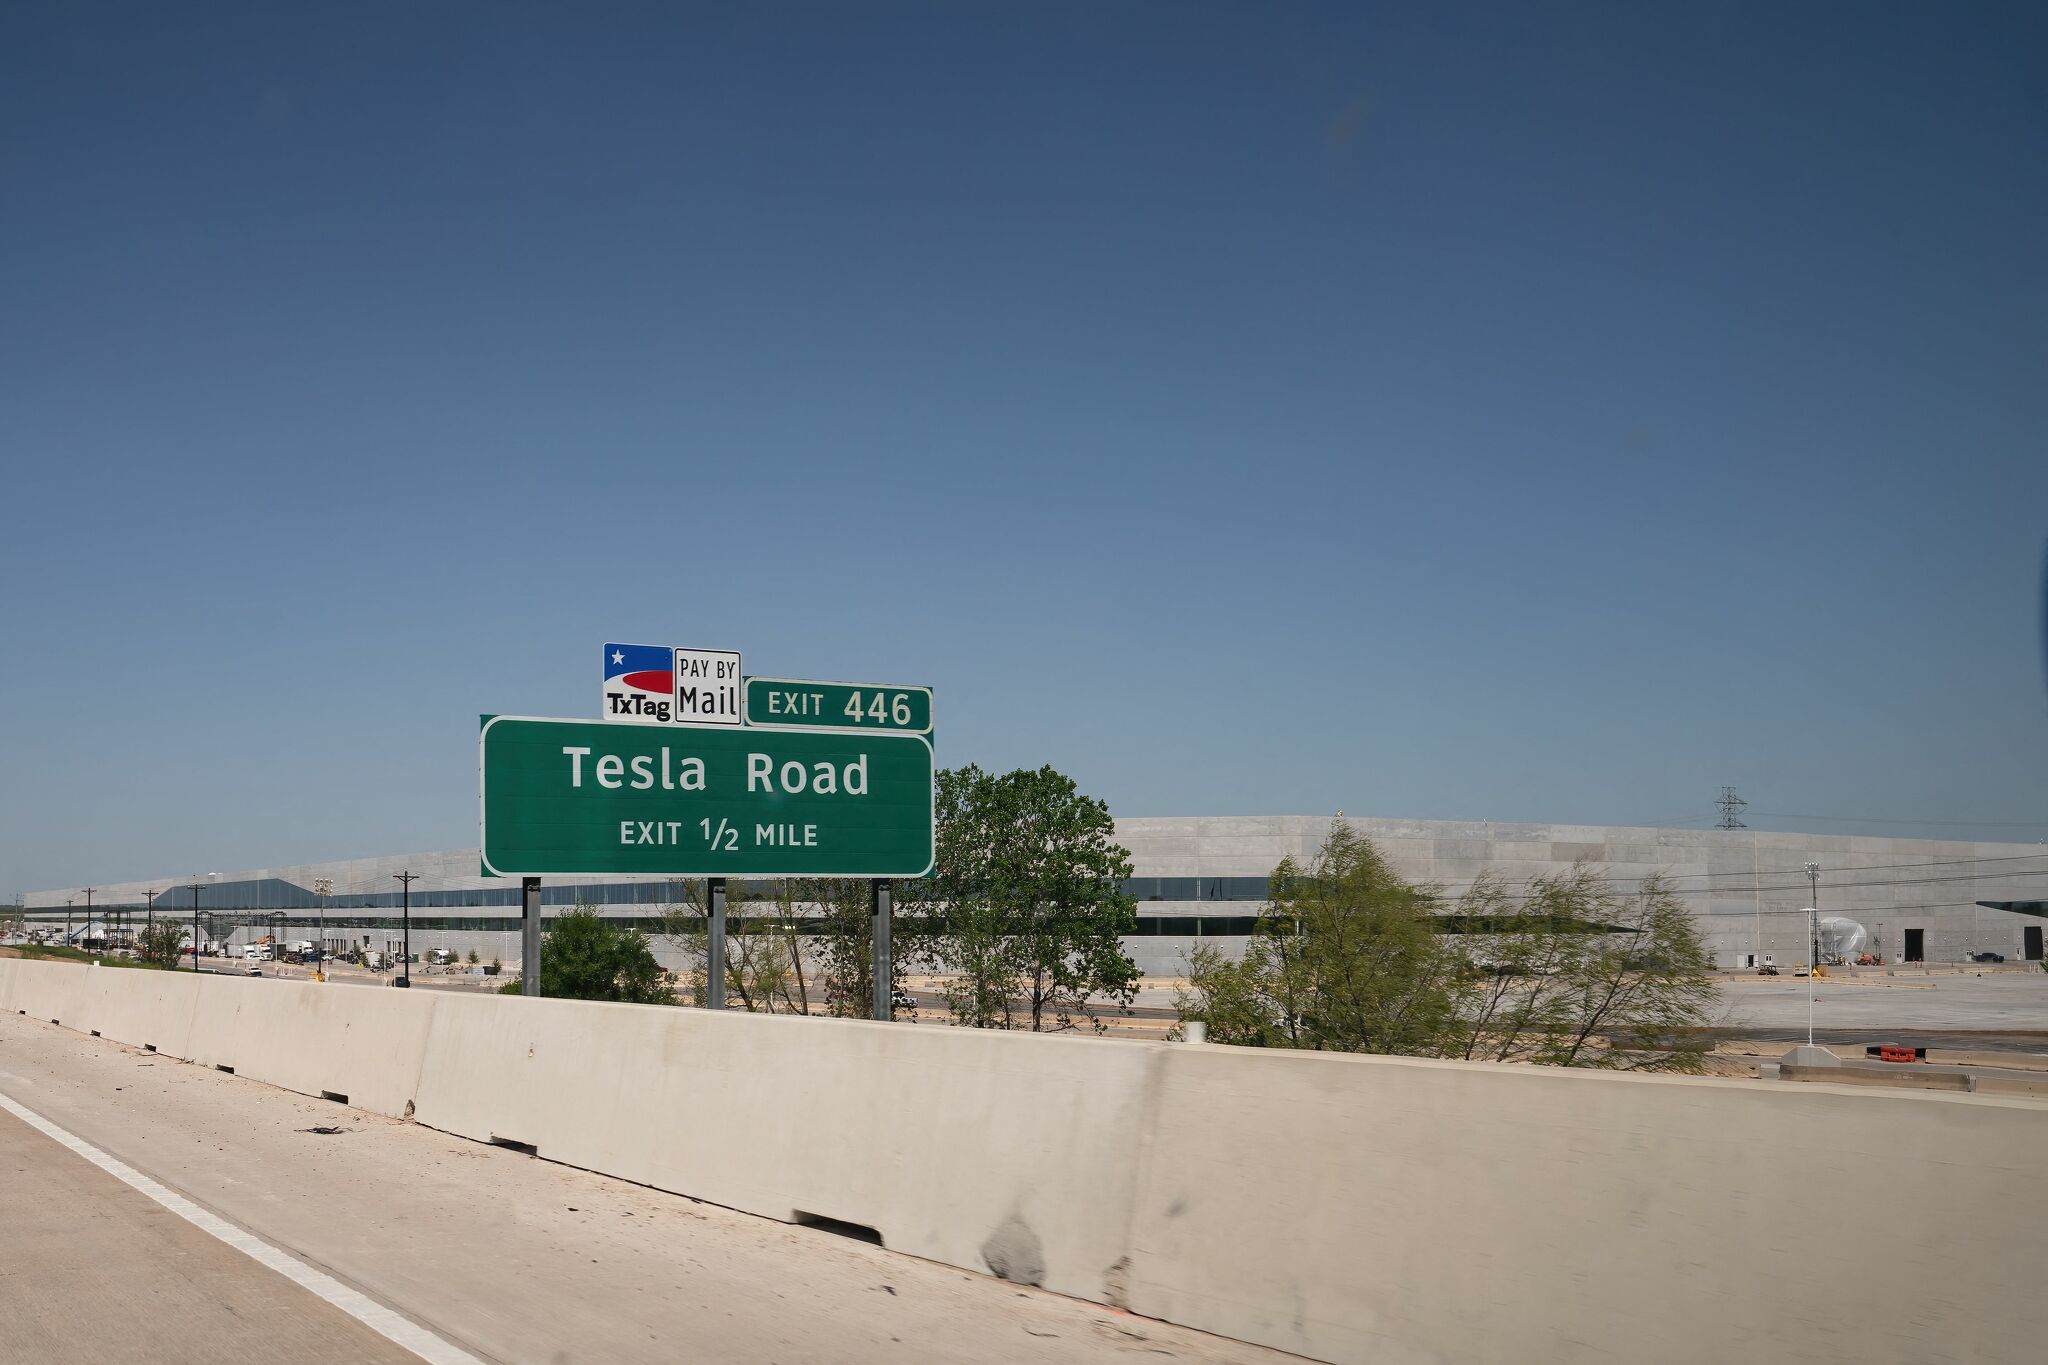 Toll road rates are spiking in Central Texas. Here's where.